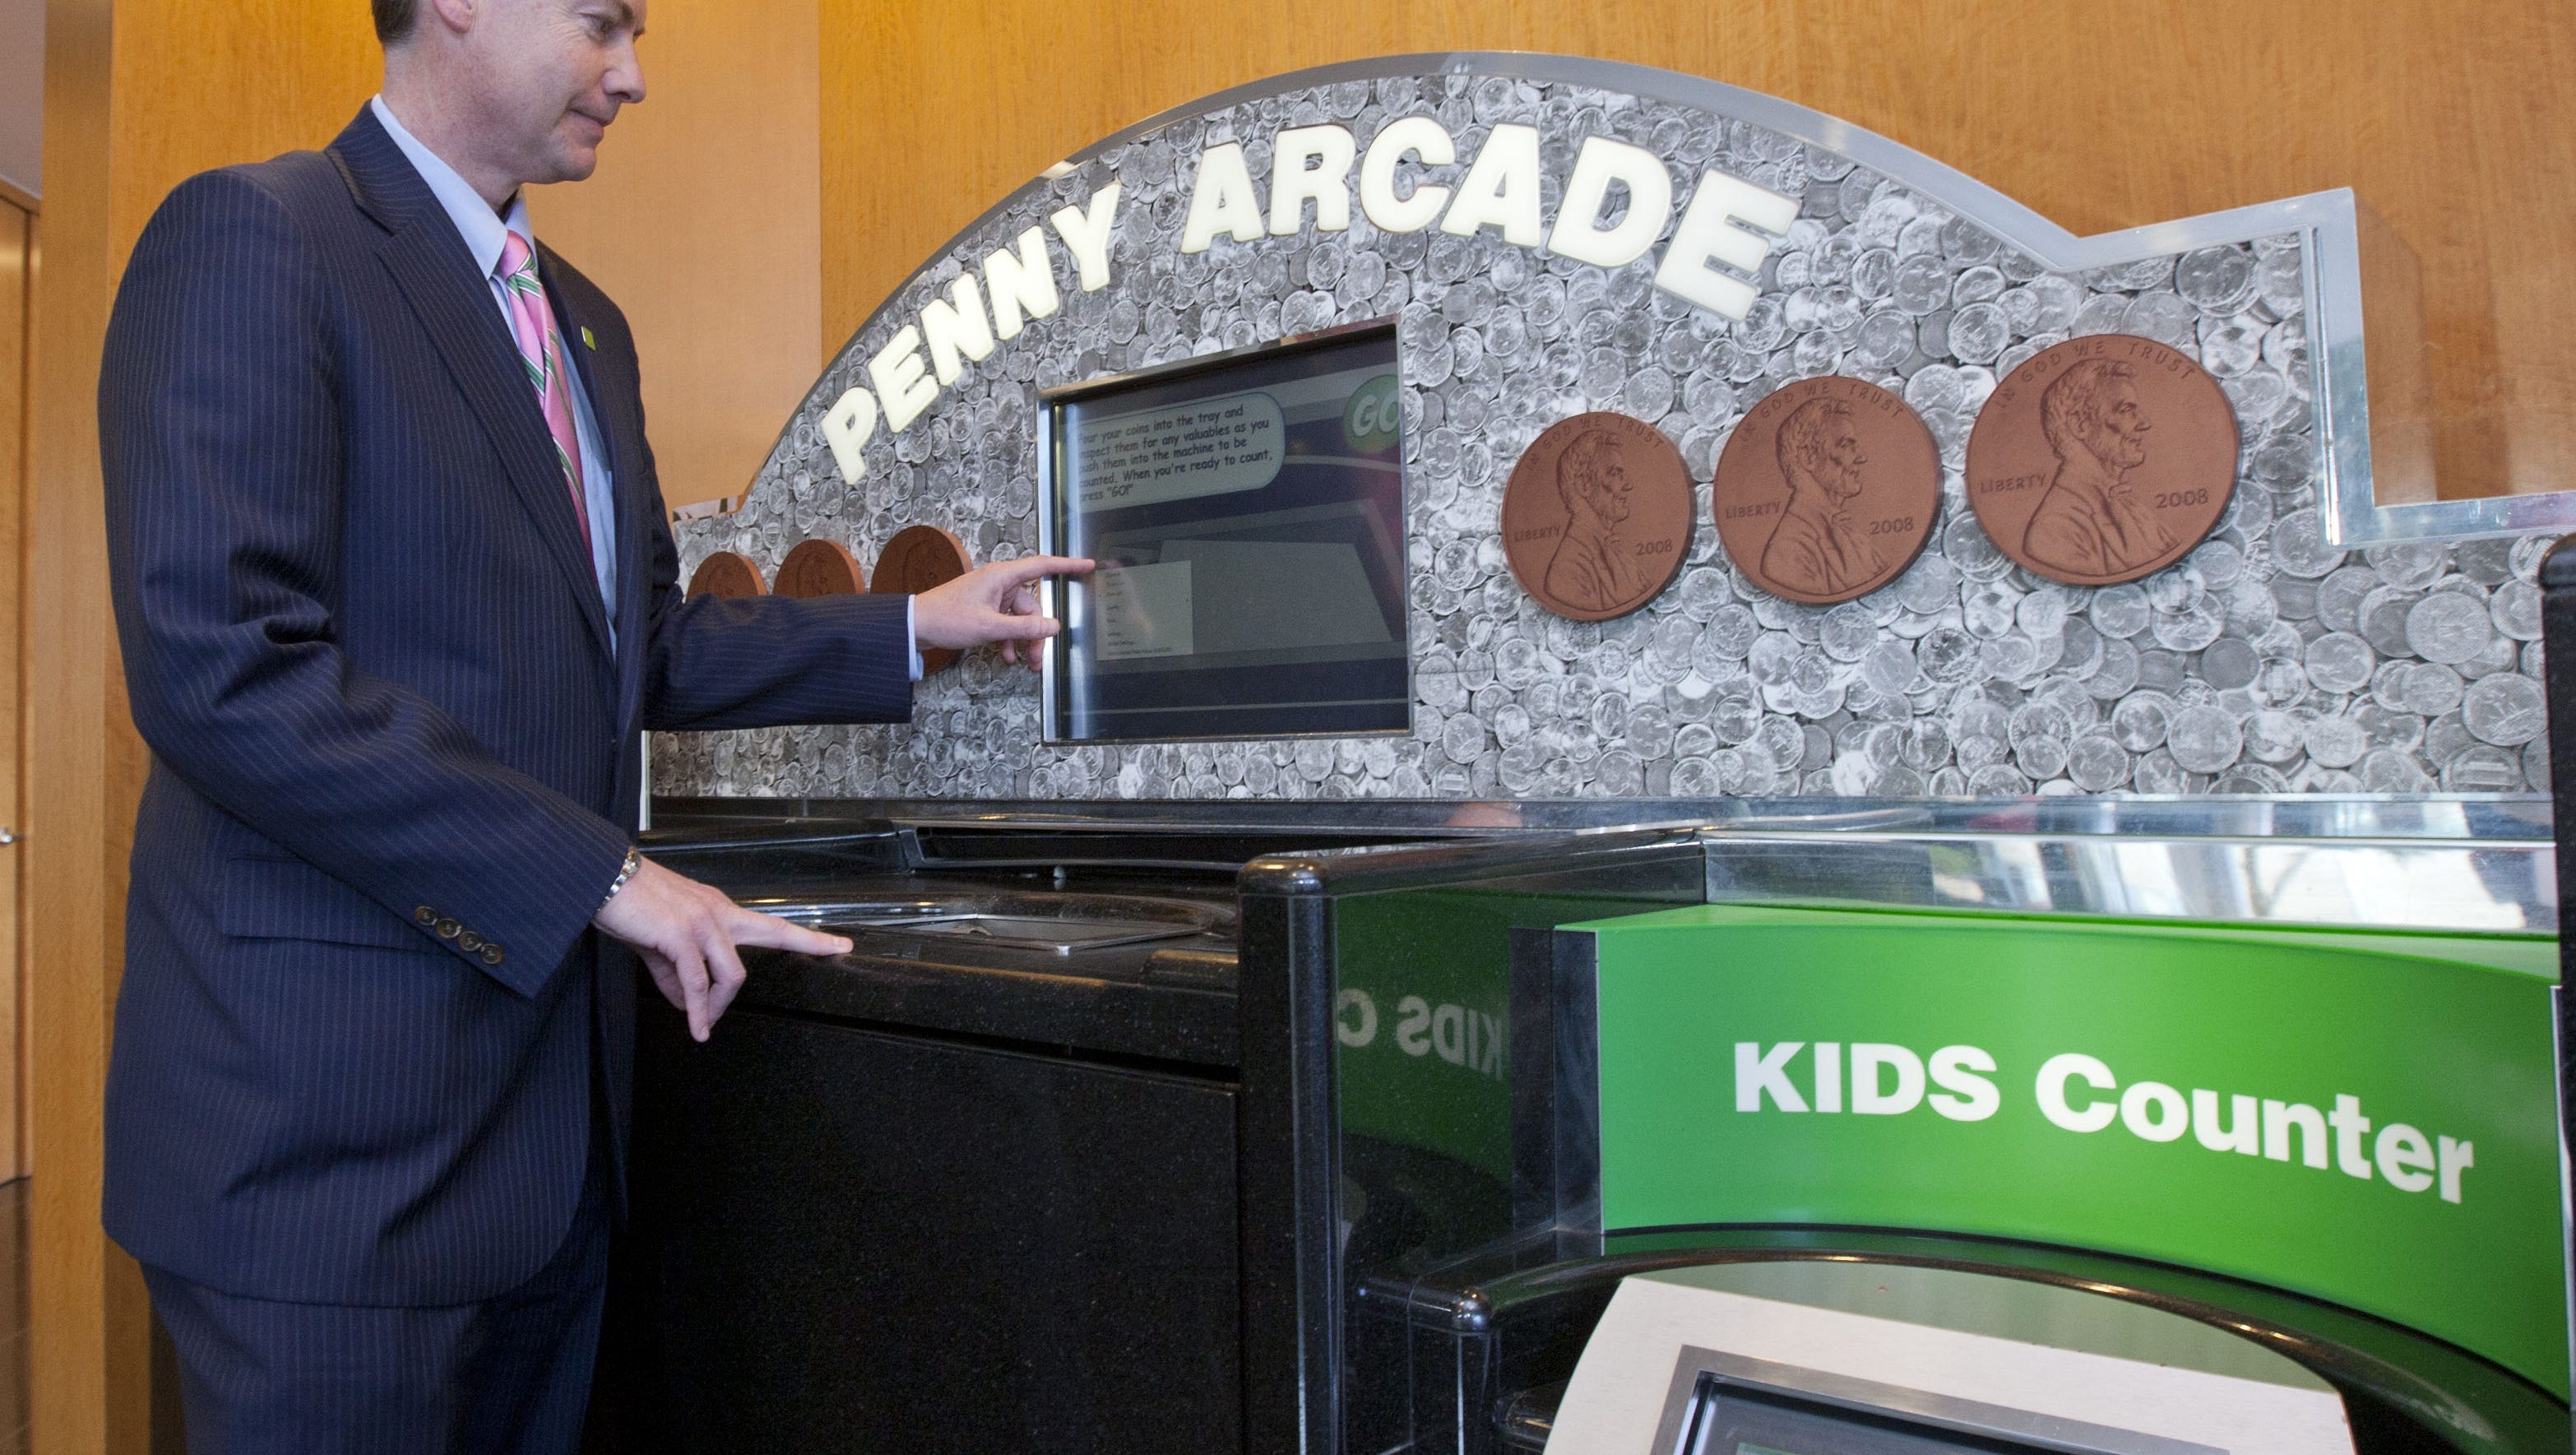 TD Bank may pay $ million to Penny Arcade users